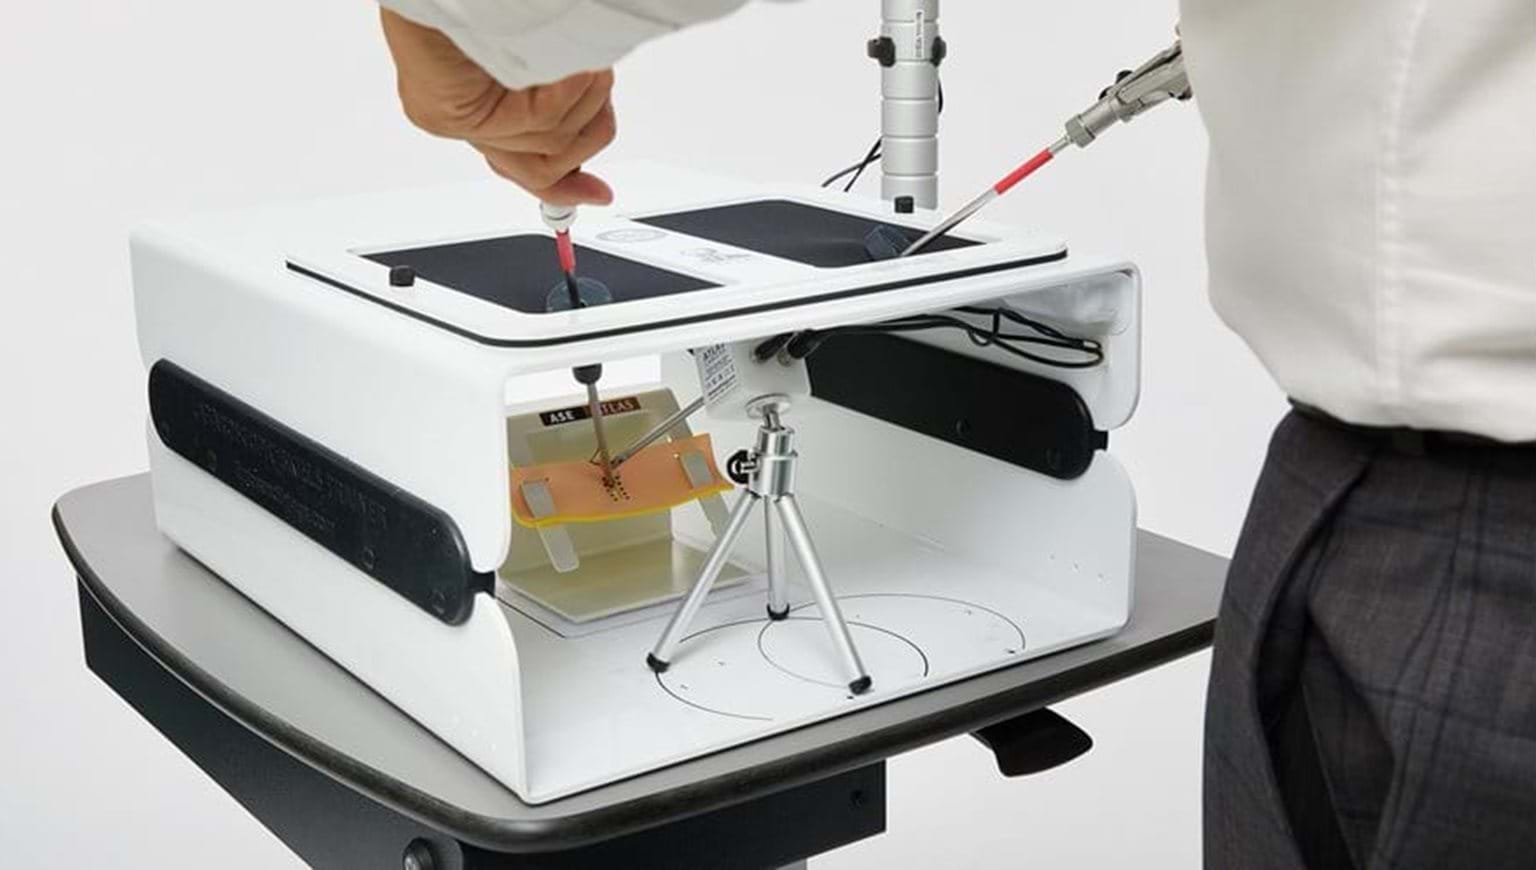 The Advanced Training in Laparoscopic Suturing (ATLAS) training kit is a laparoscopic surgery simulator designed to deliver high level minimally invasive suturing training